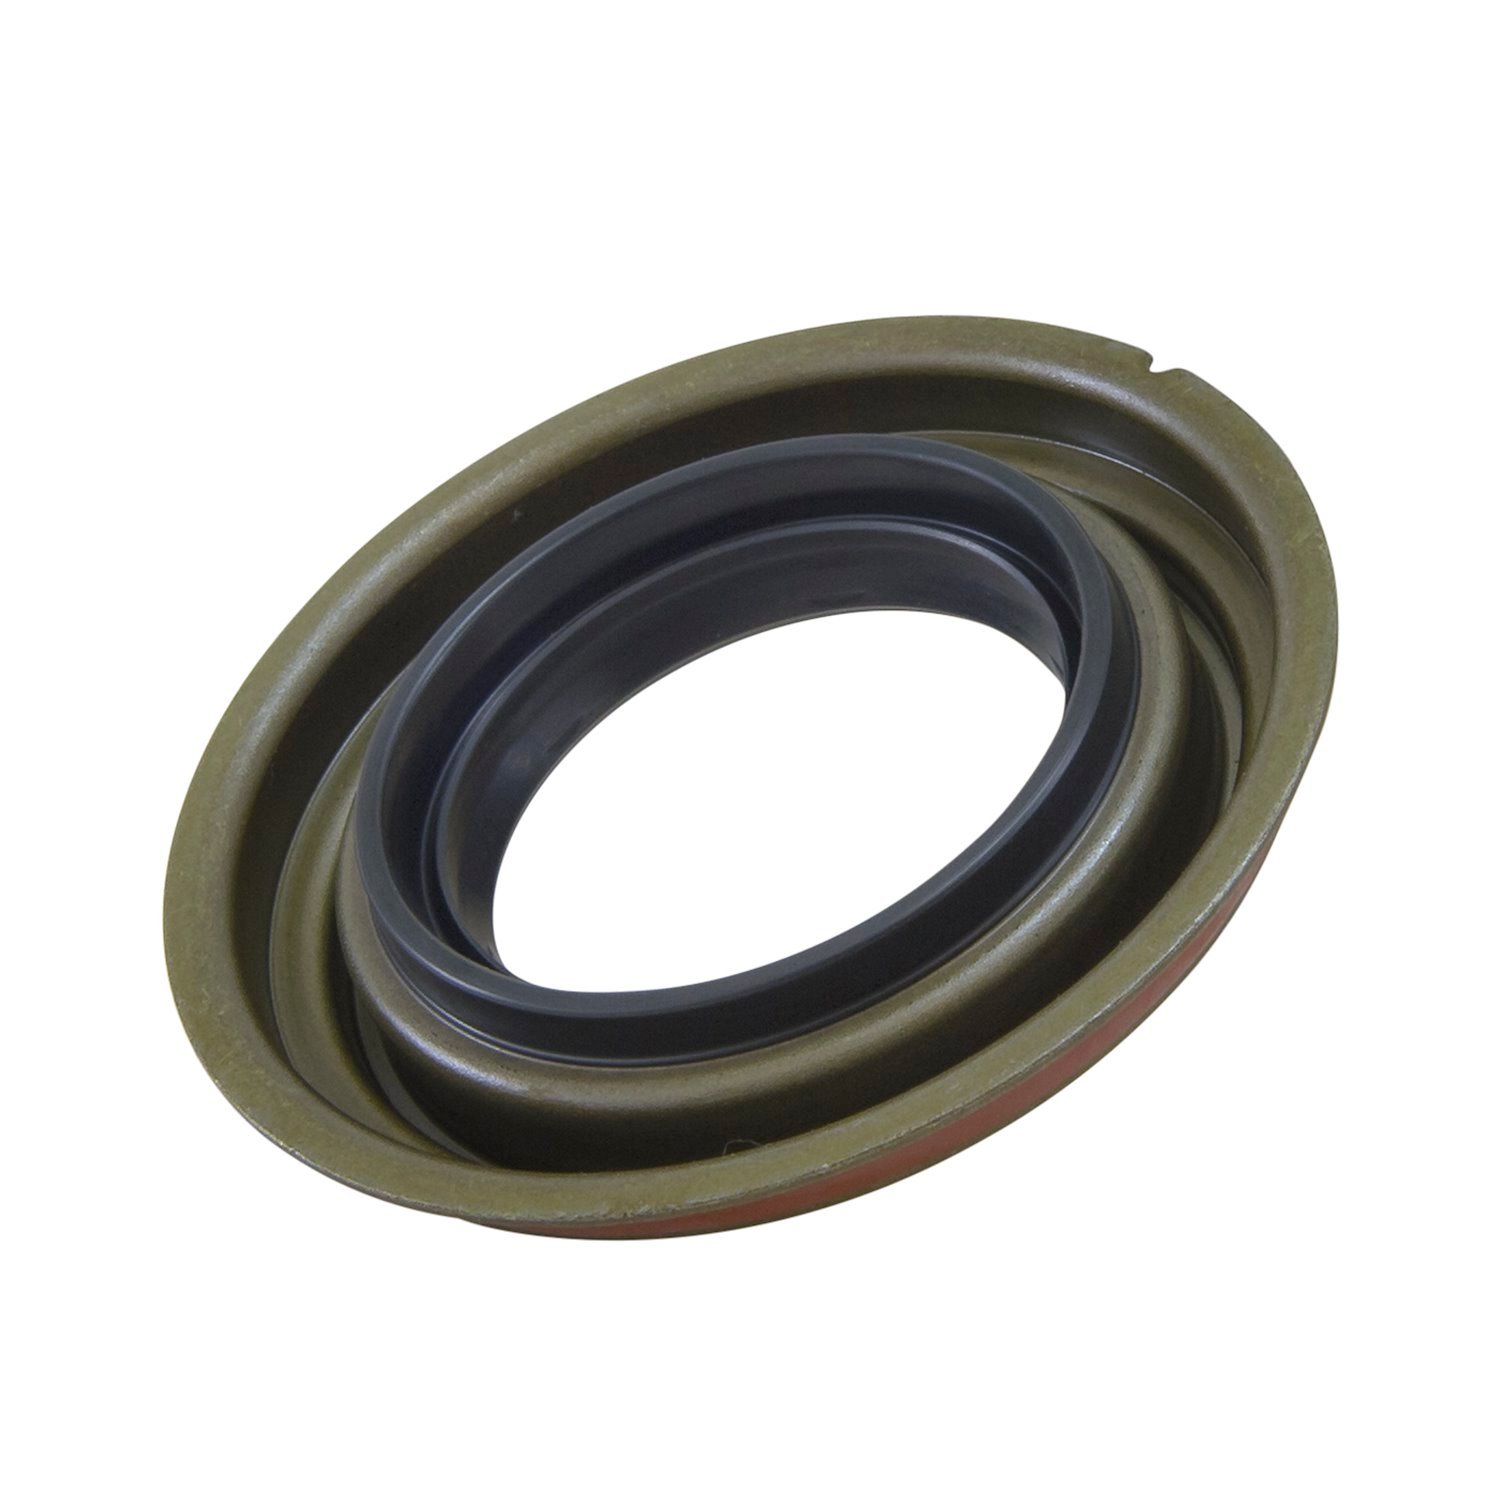 Replacement Inner wheel seal for 59- 72 Dana 30 and 44